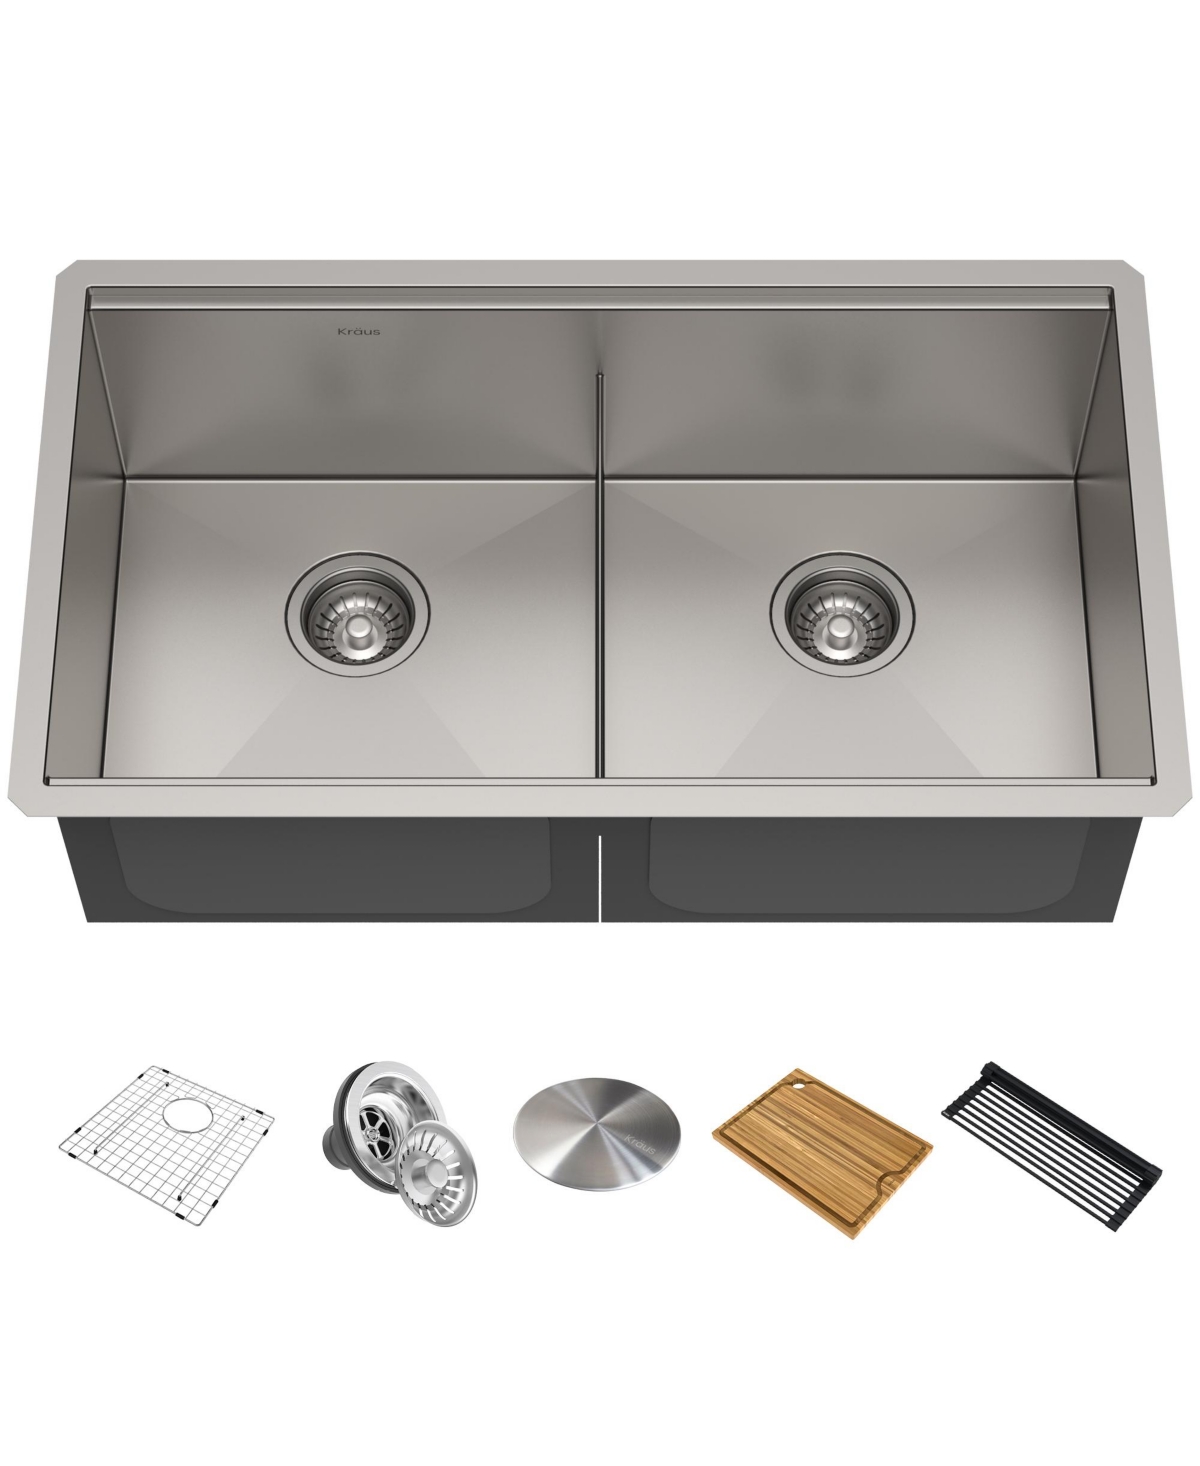 Kore 33 in. Workstation Under mount 16 Gauge 50/50 Double Bowl Stainless Steel Kitchen Sink with Accessories - Stainless steel